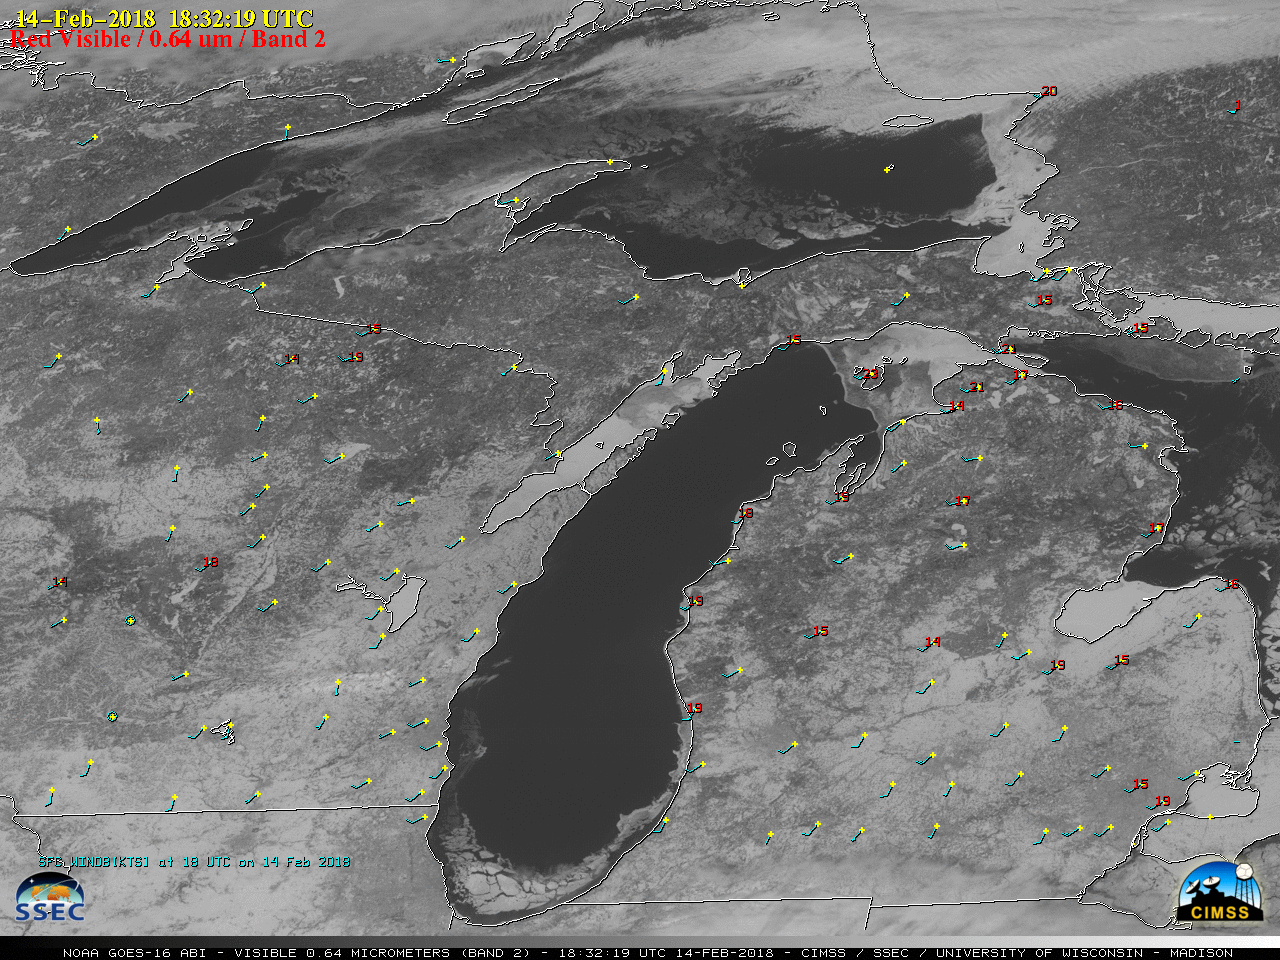 GOES-16 "Red" Visible (0.64 µm) images, with hourly plots of surface wind barbs in cyan and wind gusts (kn0ts) in red (click to play Animated GIF)